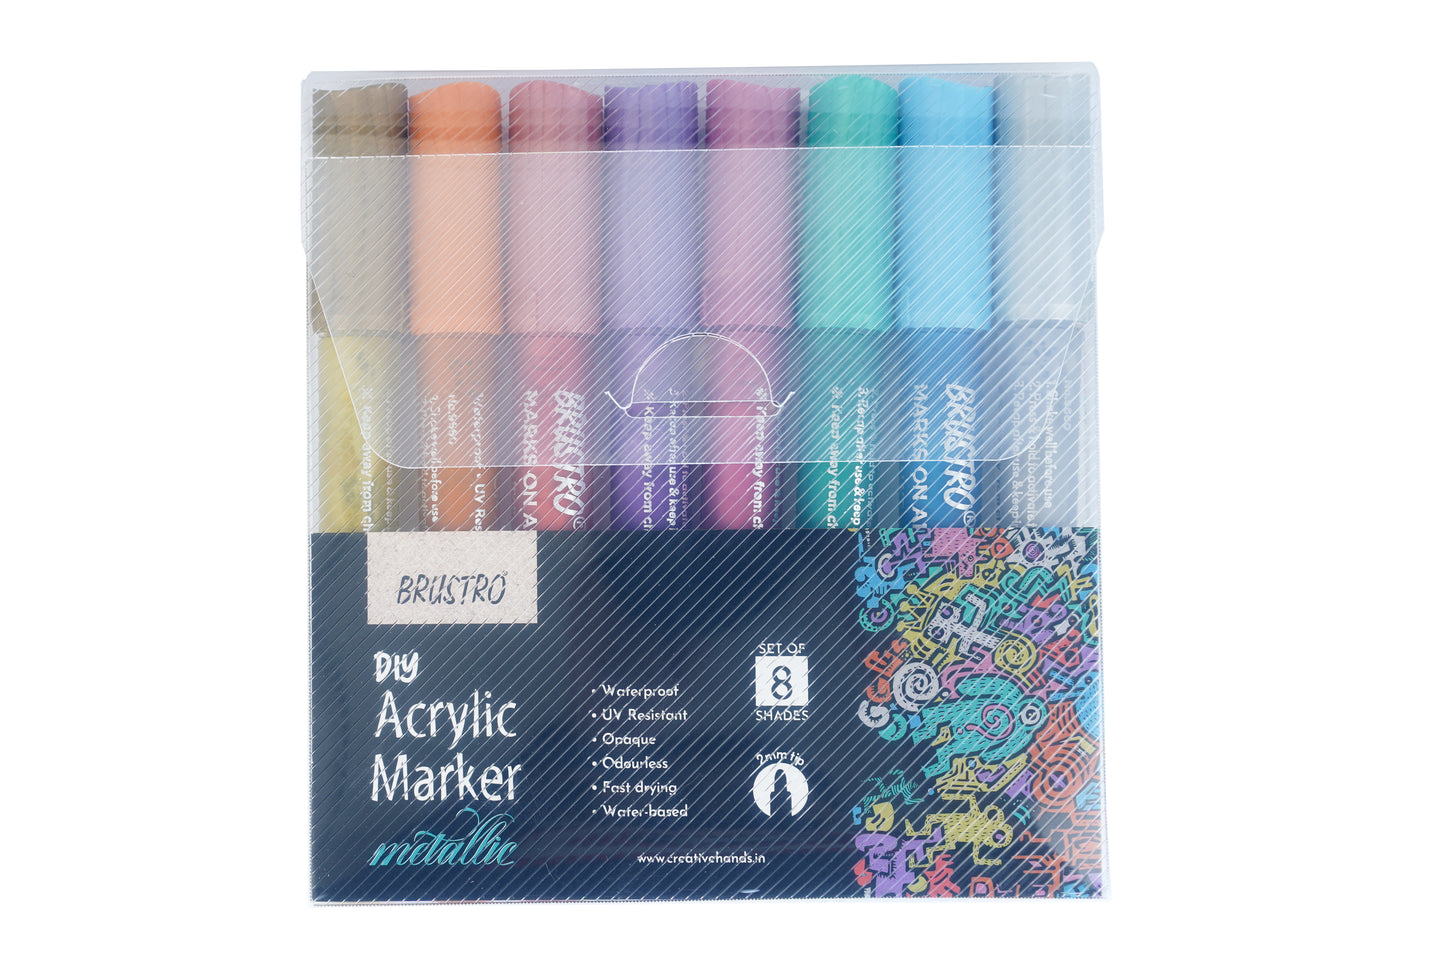 Brustro Acrylic (DIY) Marker Set of 8 (Metallic Shades) for Craftworks, School Projects, and Other Presentations